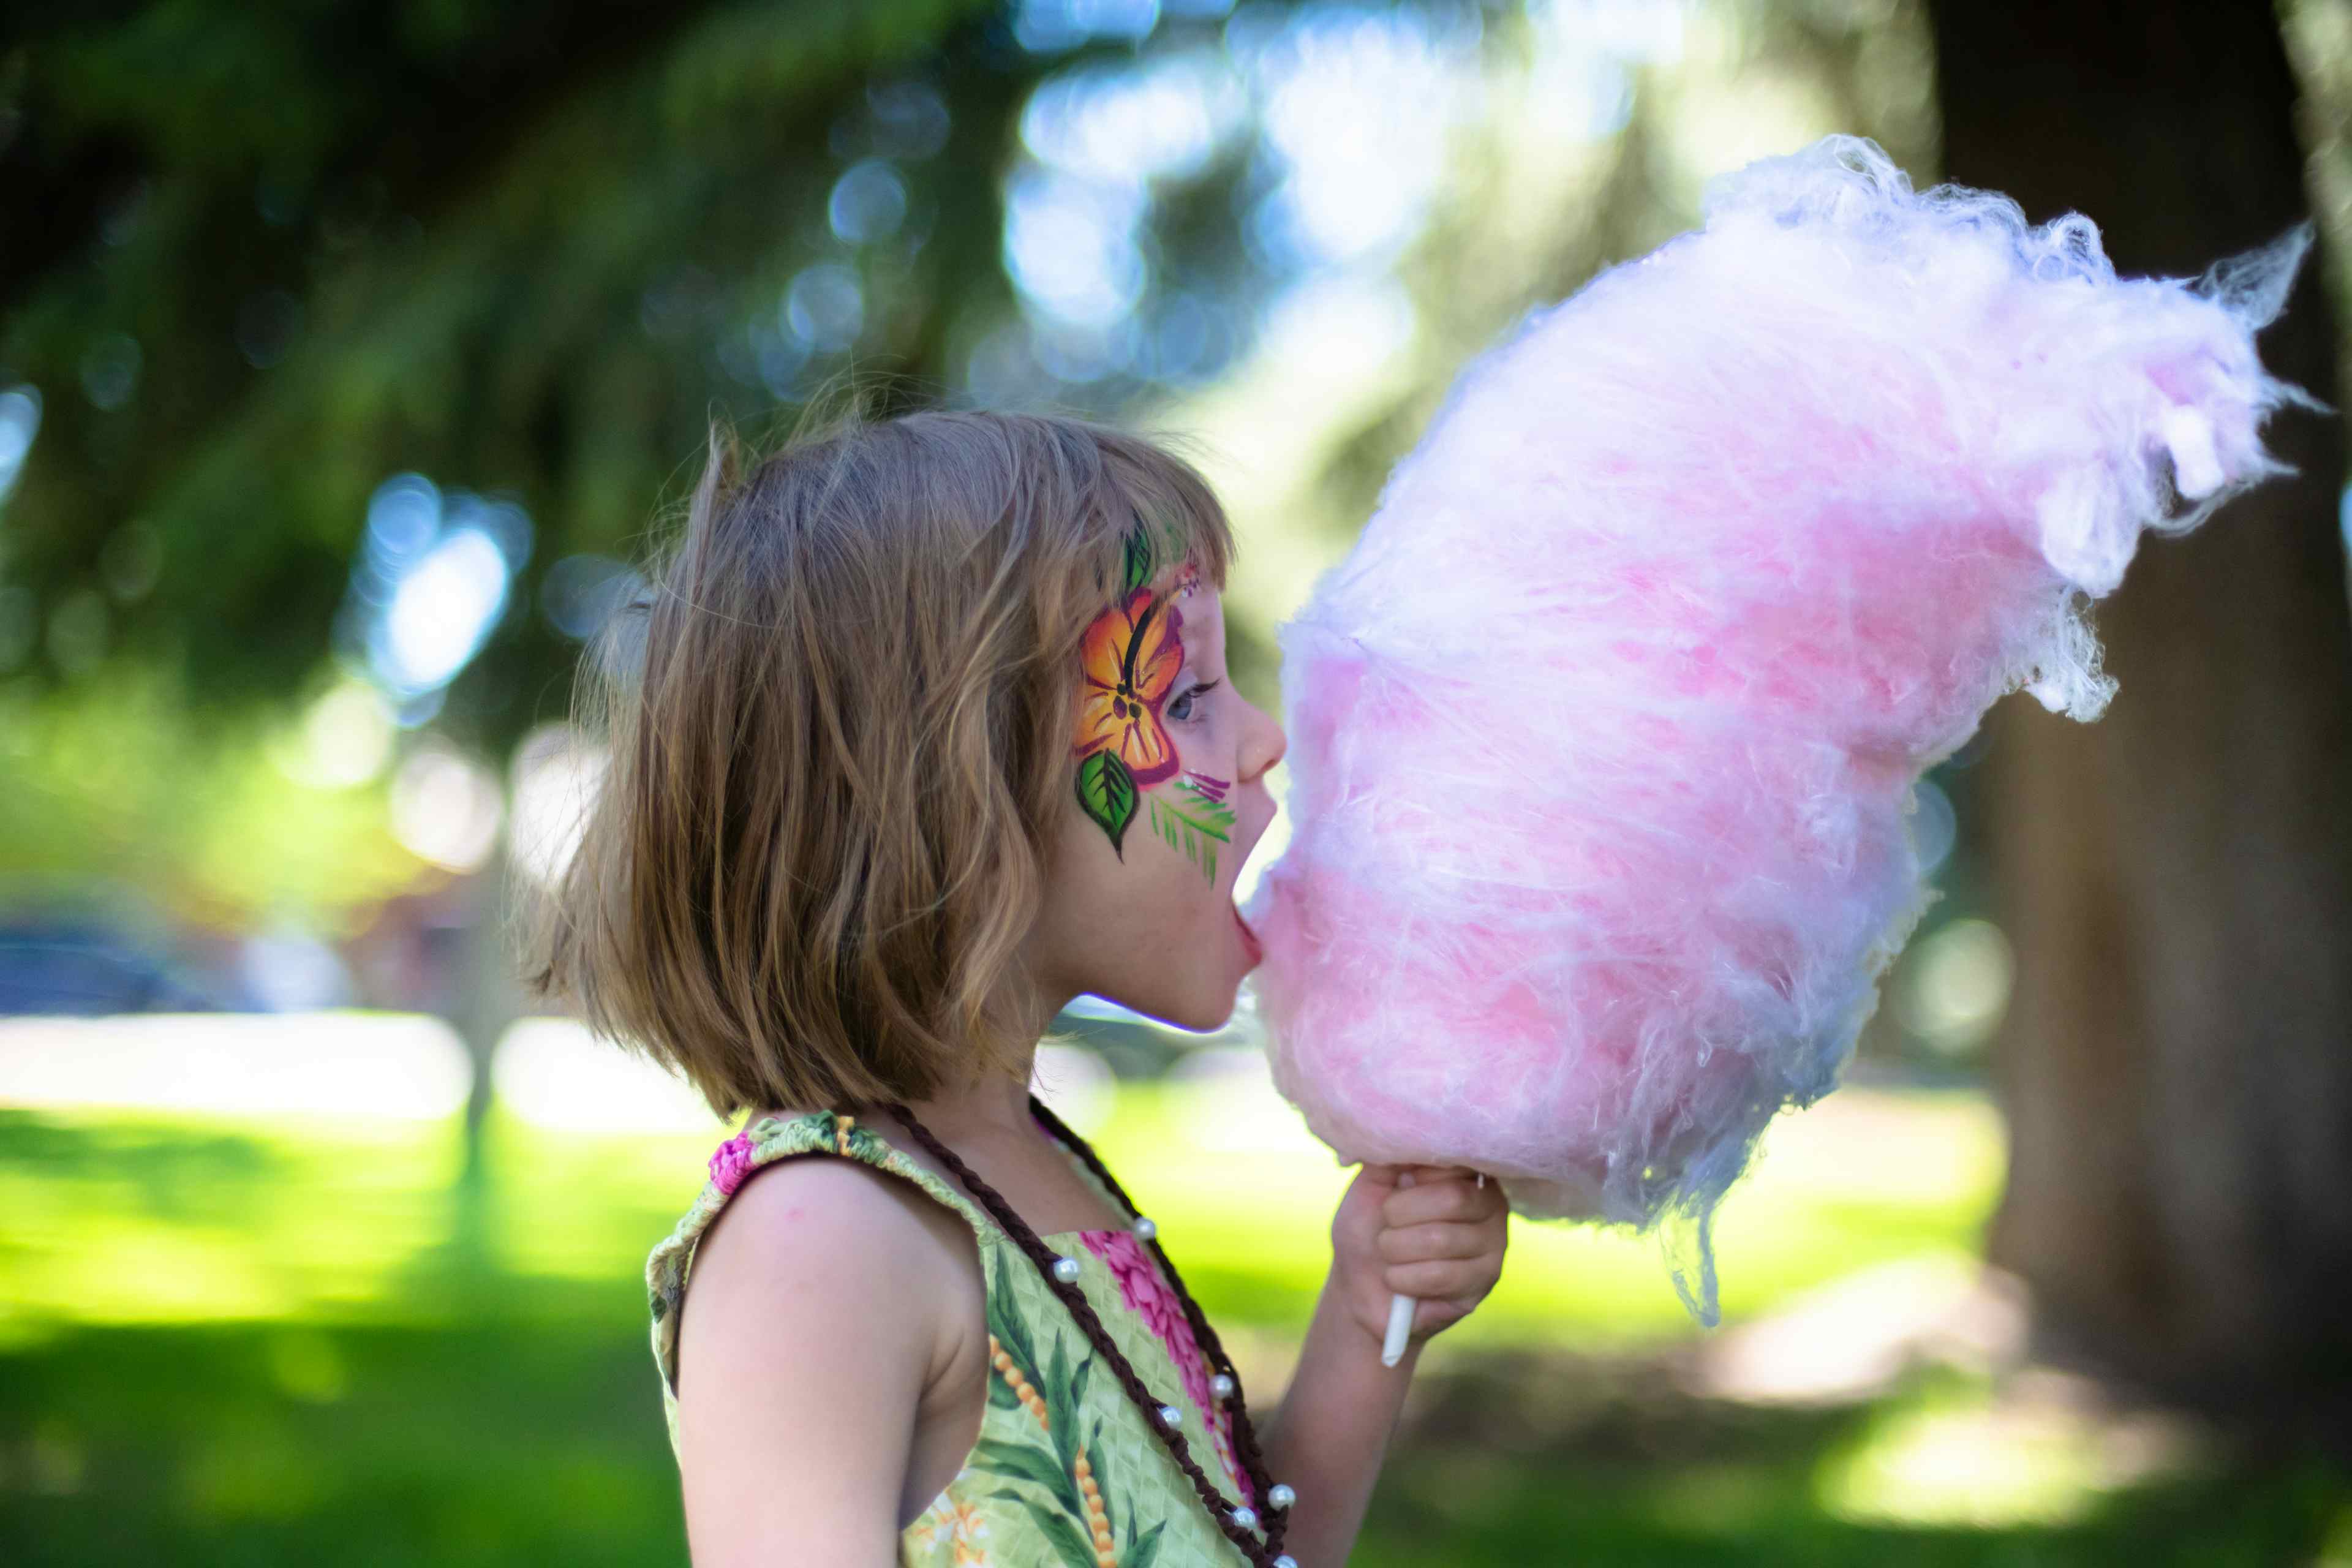 A young girls eats cotton candy at Music on Main in Victor Idaho, a part of Eastern Idaho and Yellowstone Teton Territory.